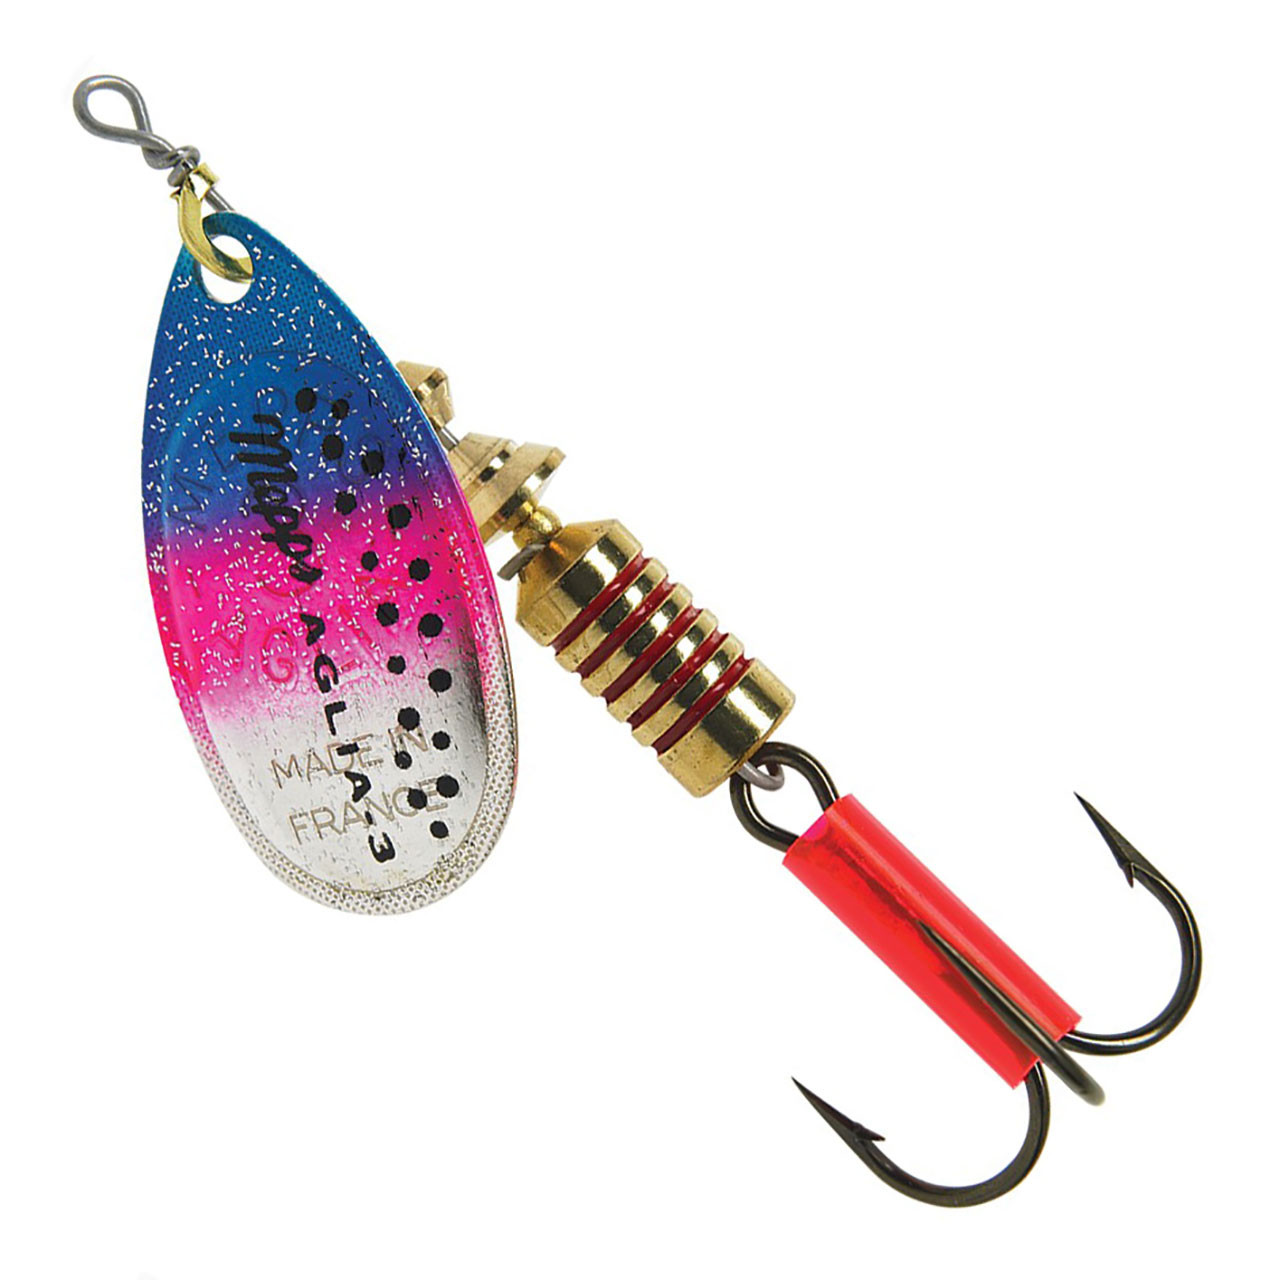 mepps Aglia B0 S Spinner Lure, Arctic Grayling, Brook Trout, Carp,  Cutthroat Trout, Dolly Varden Trout D&B Supply